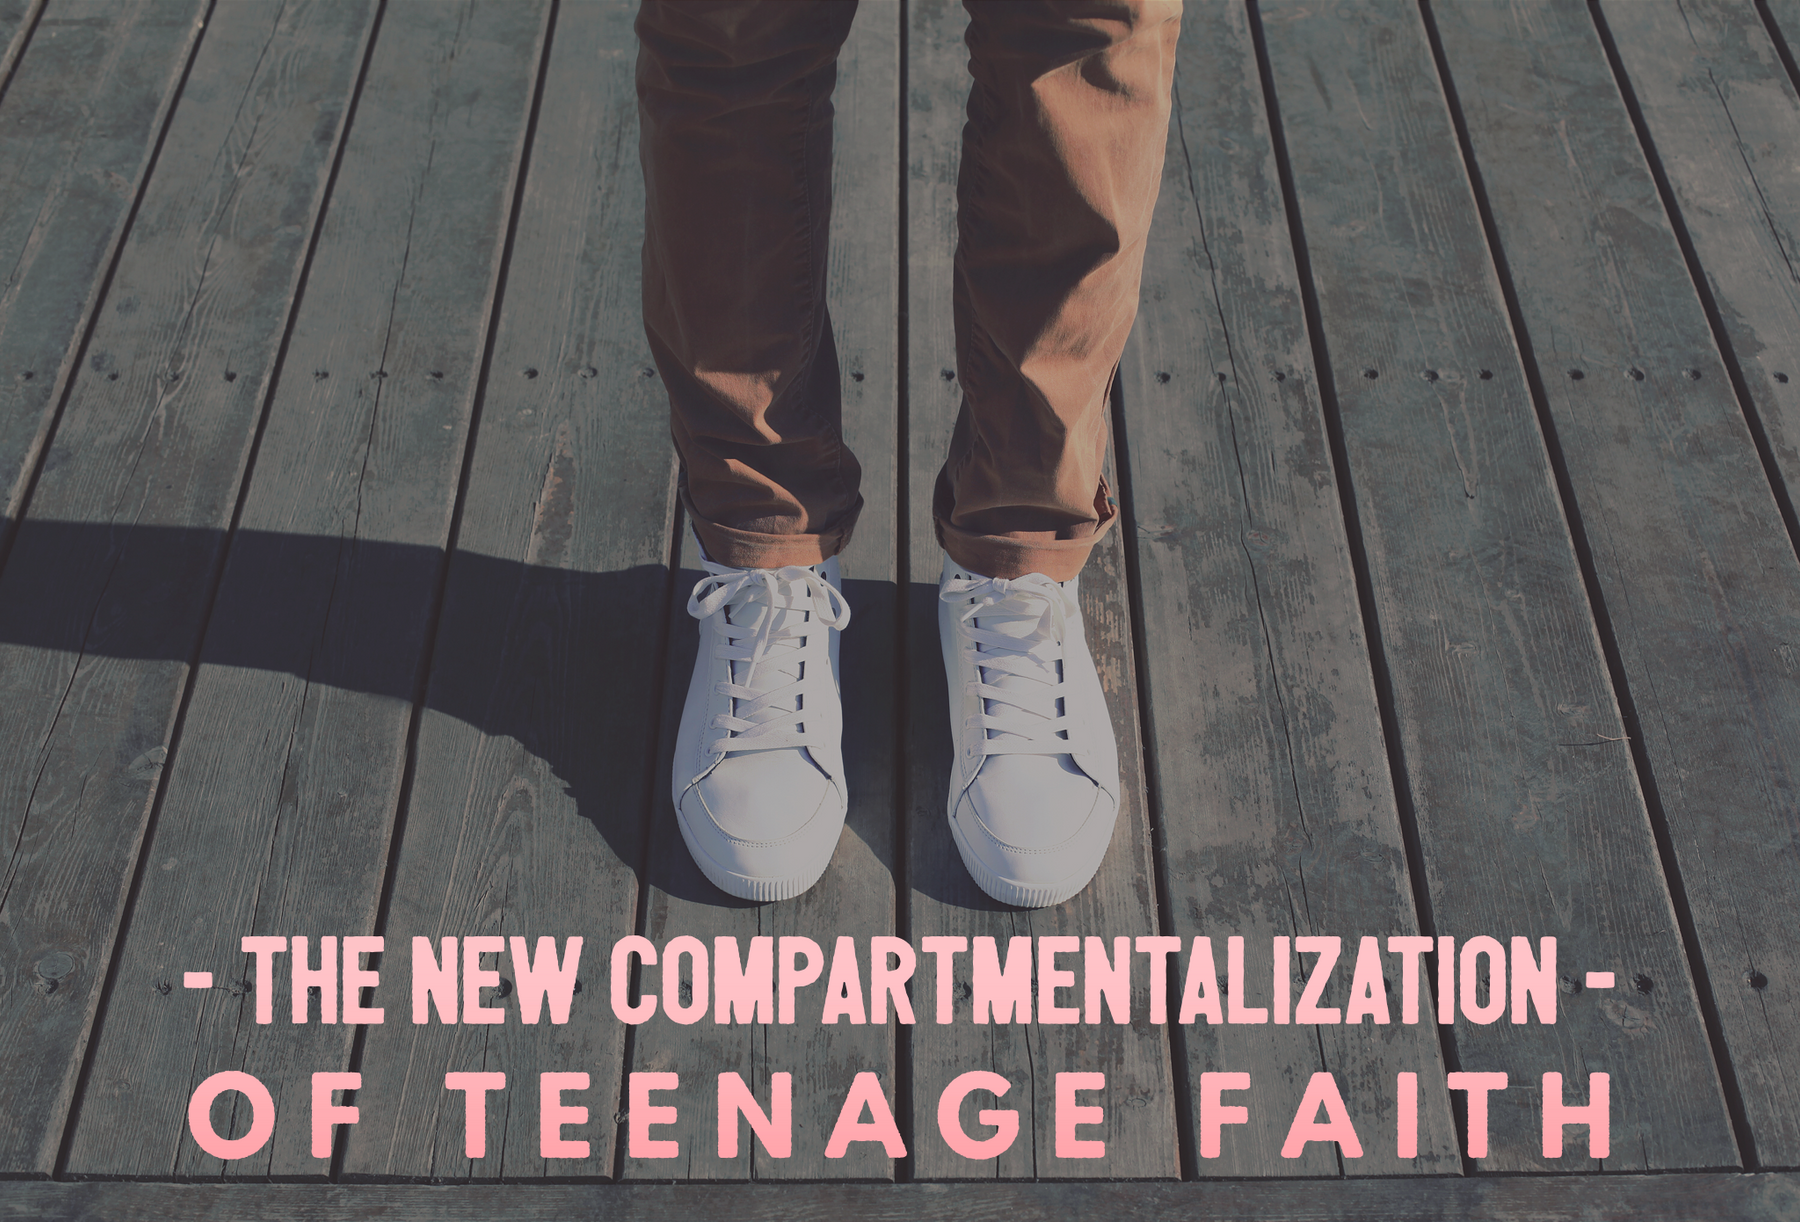 The New Compartmentalization Of Teenagers' Faith